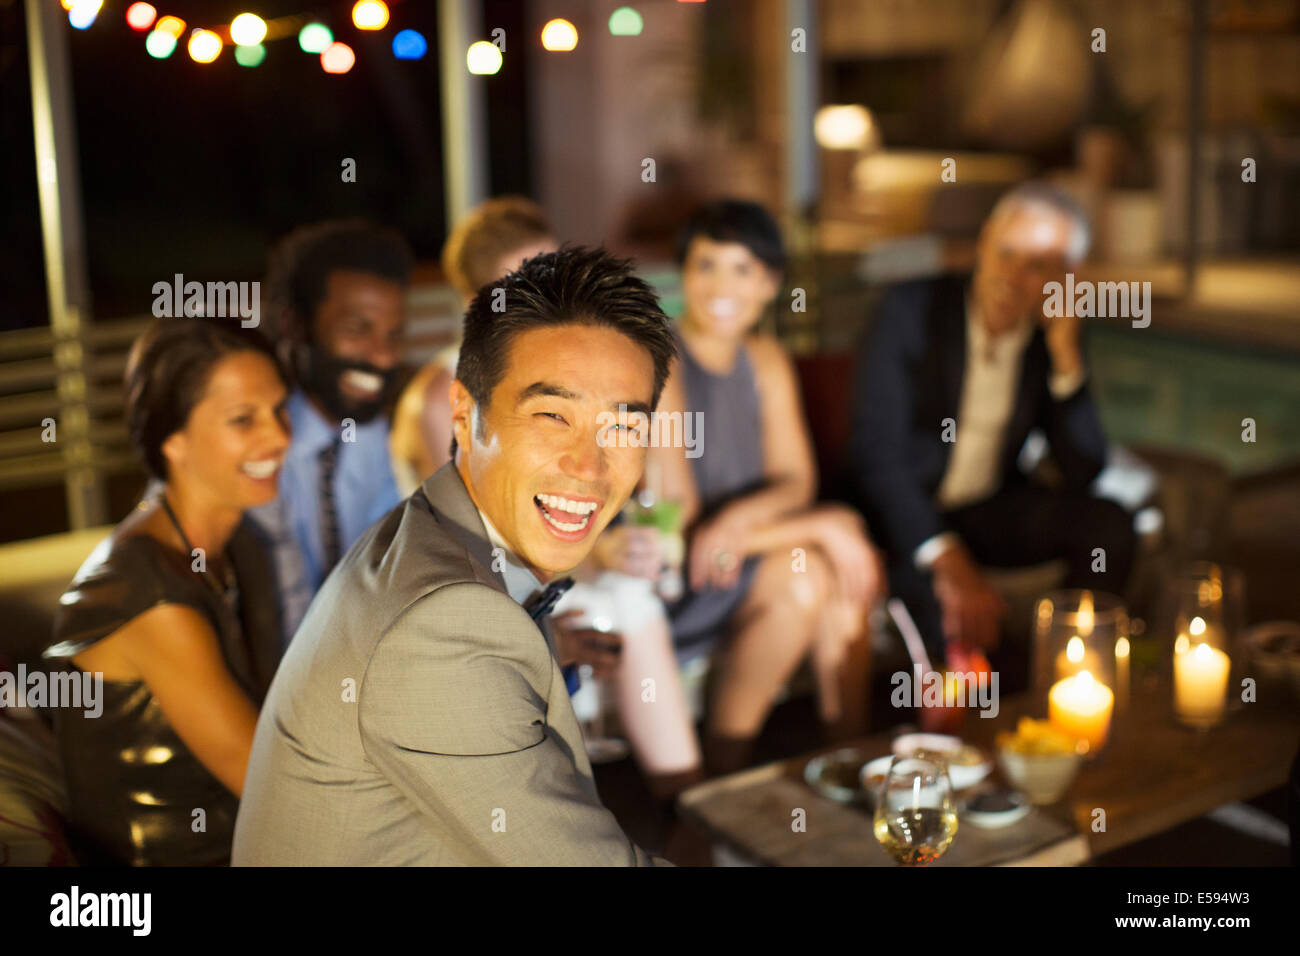 Man laughing at party Banque D'Images